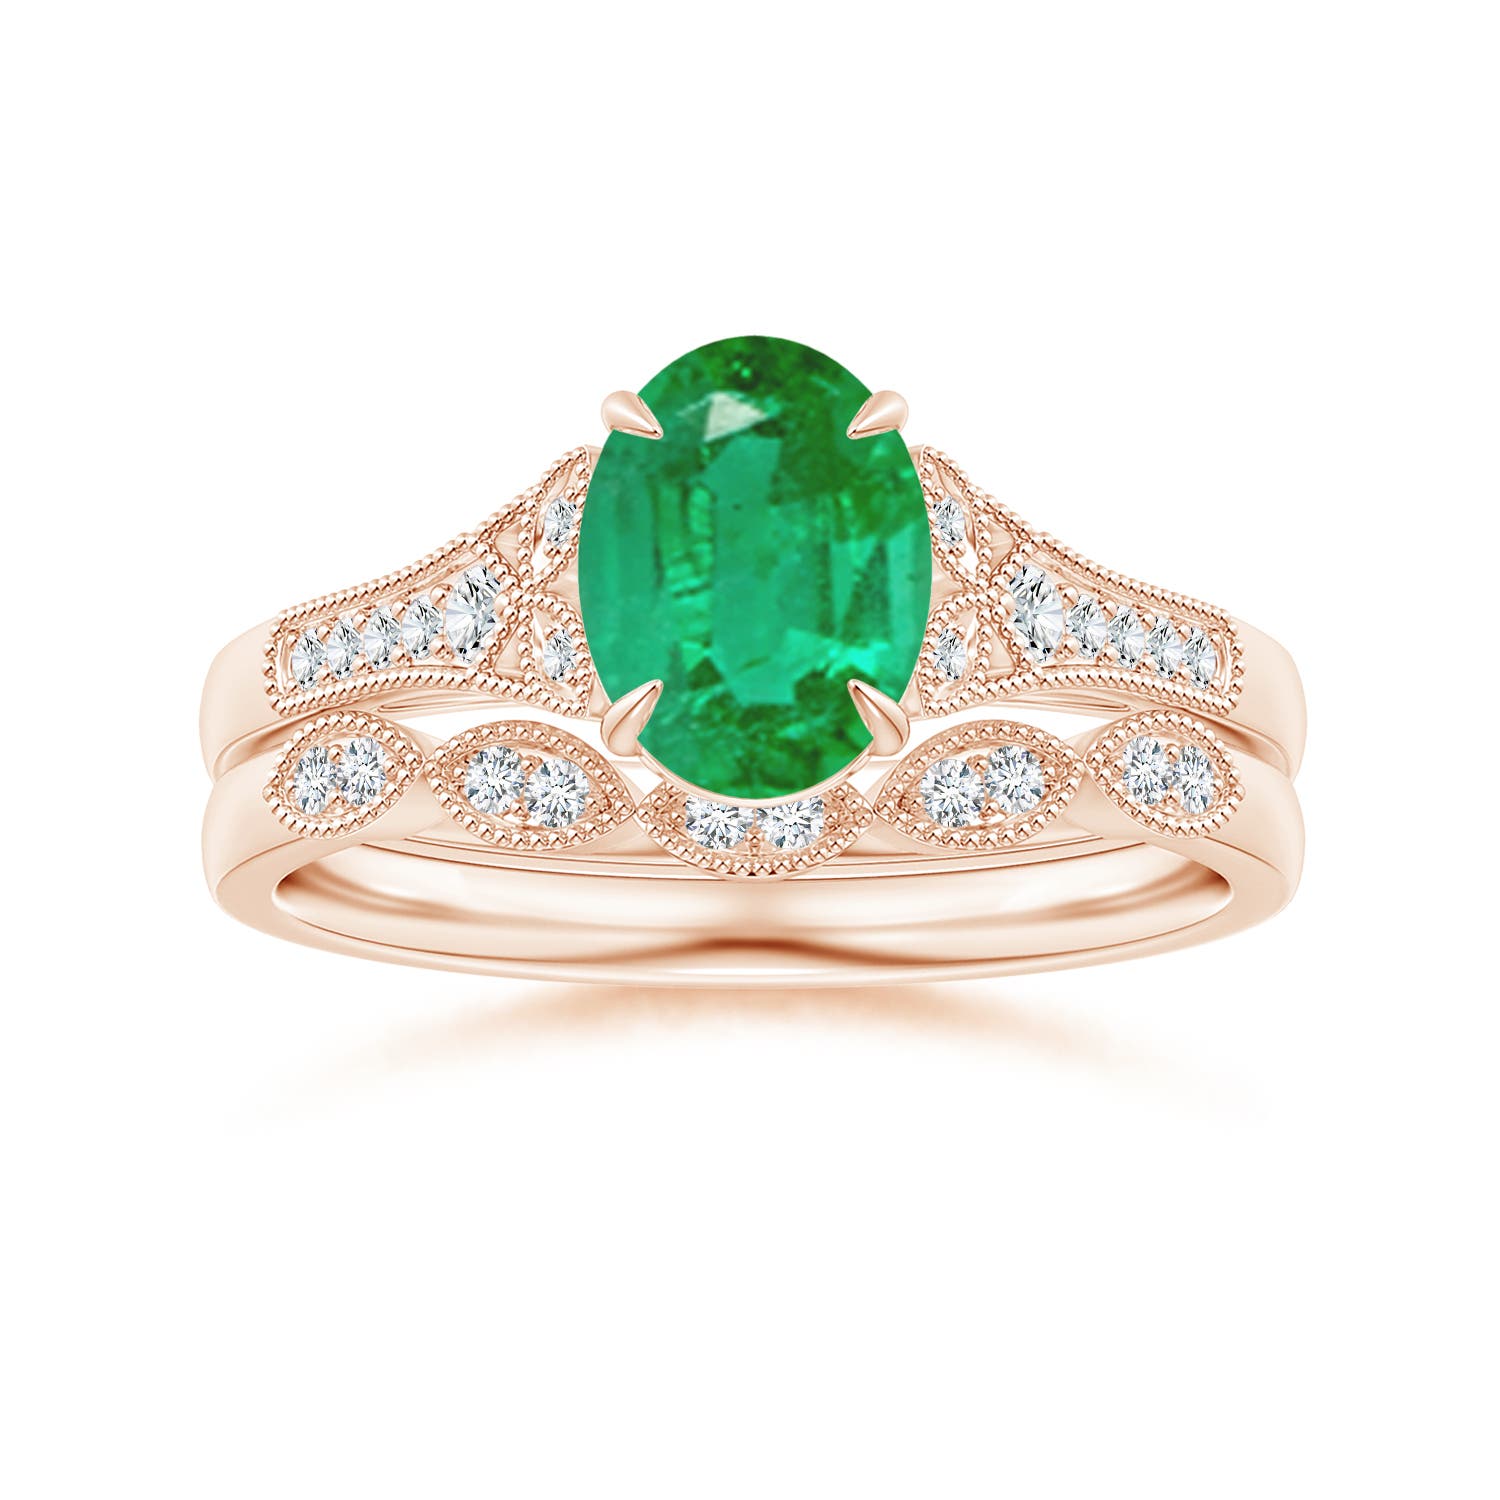 AA - Emerald / 1.24 CT / 14 KT Rose Gold